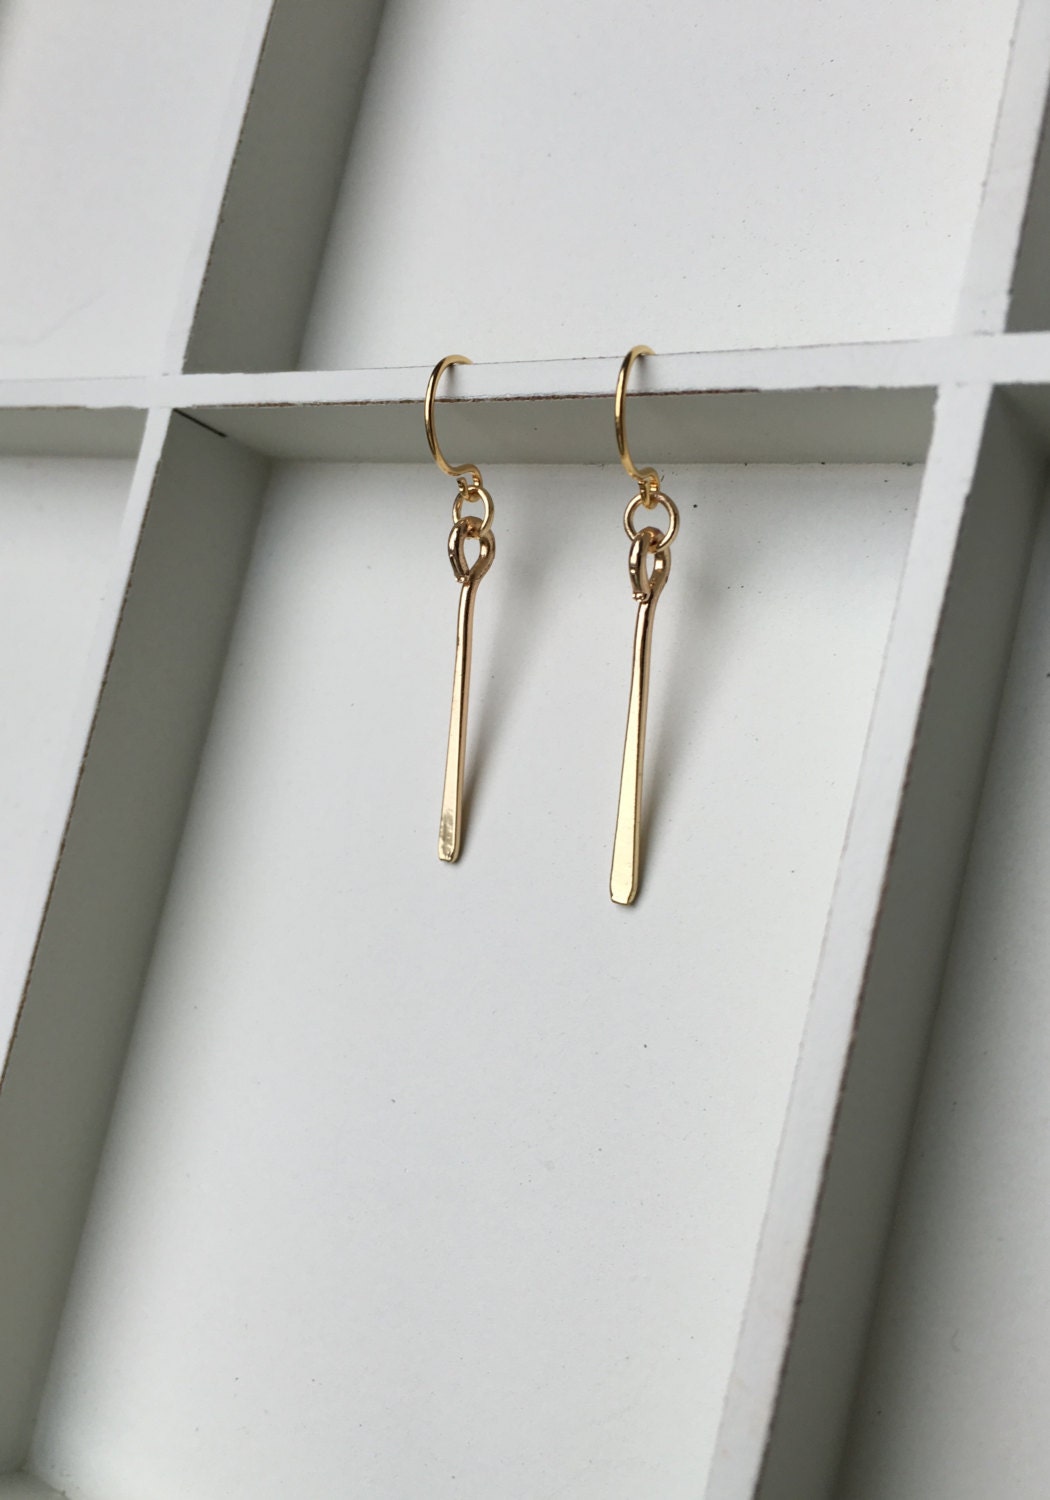 Ships free/ Tiny Gold Bar Drop Earrings by EmeraldElements on Etsy